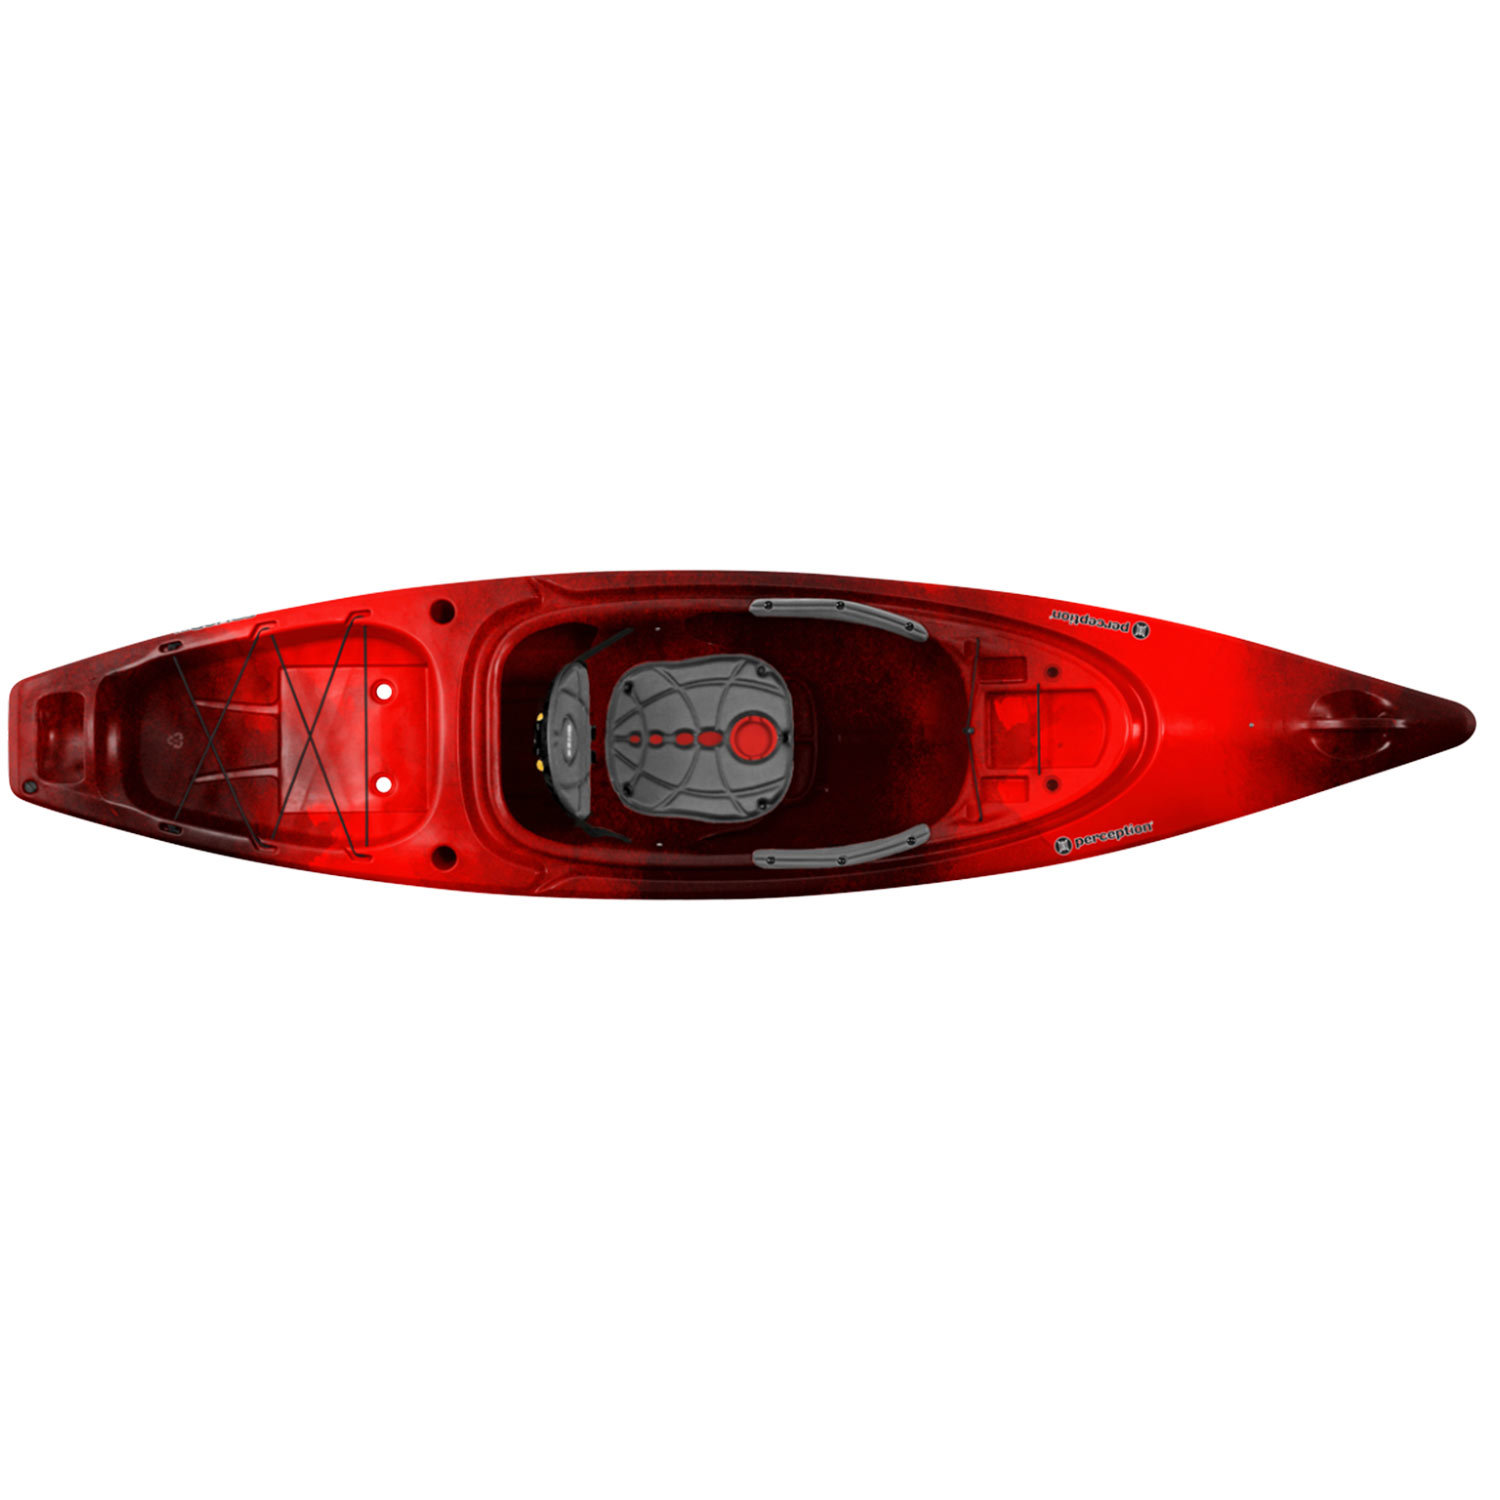 Perception Sound 10.5 | Sit Inside Kayak for Fishing and Fun | Two Rod  Holders | Large Rear Storage | 10' 6